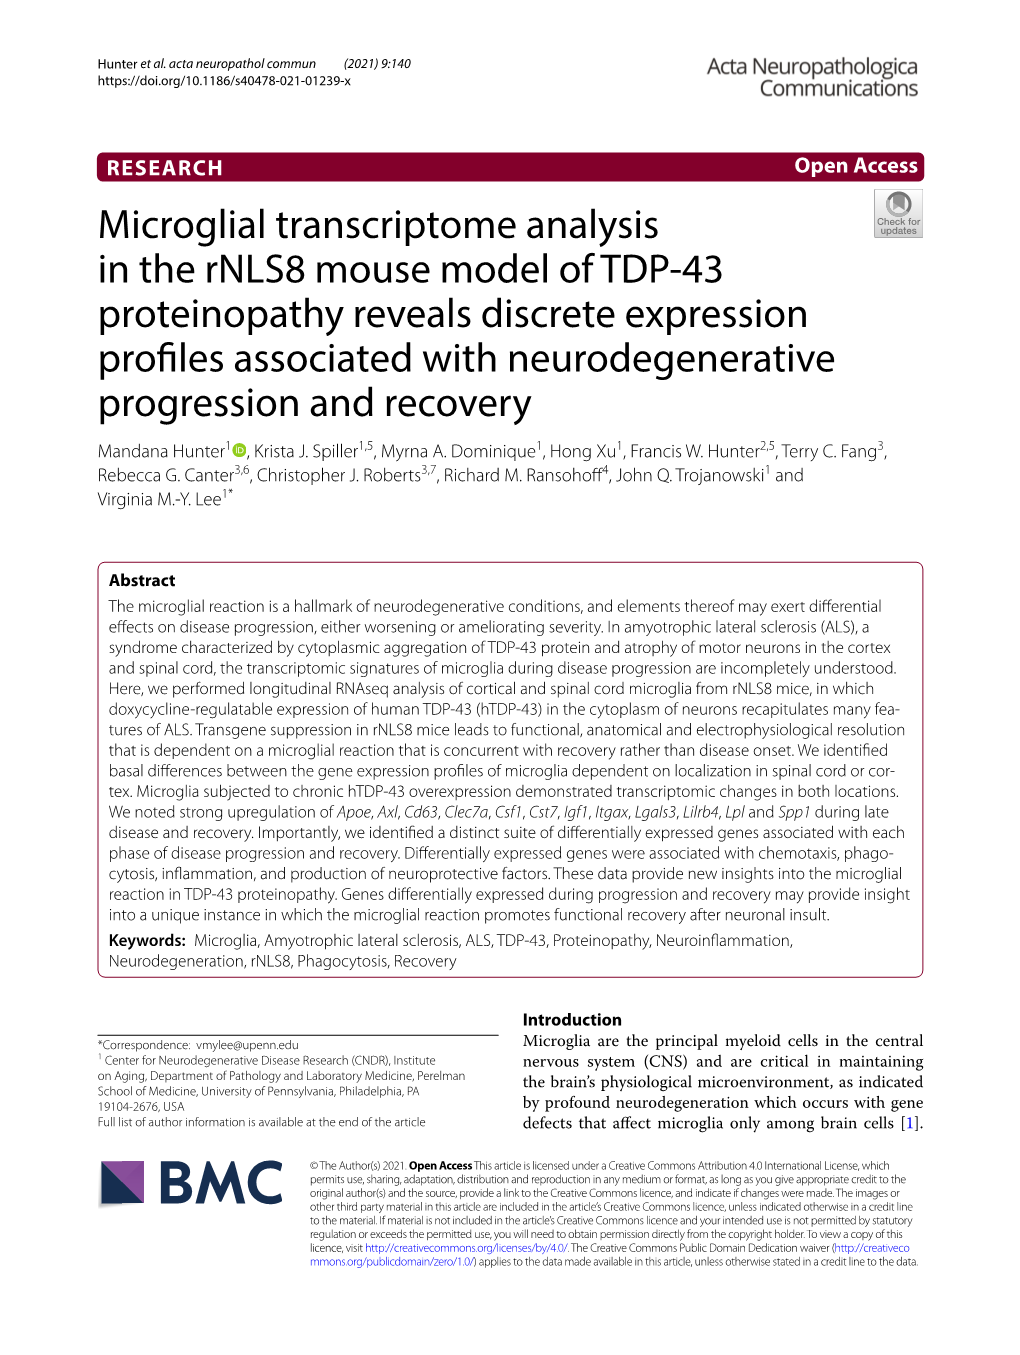 Microglial Transcriptome Analysis in the Rnls8 Mouse Model of TDP-43